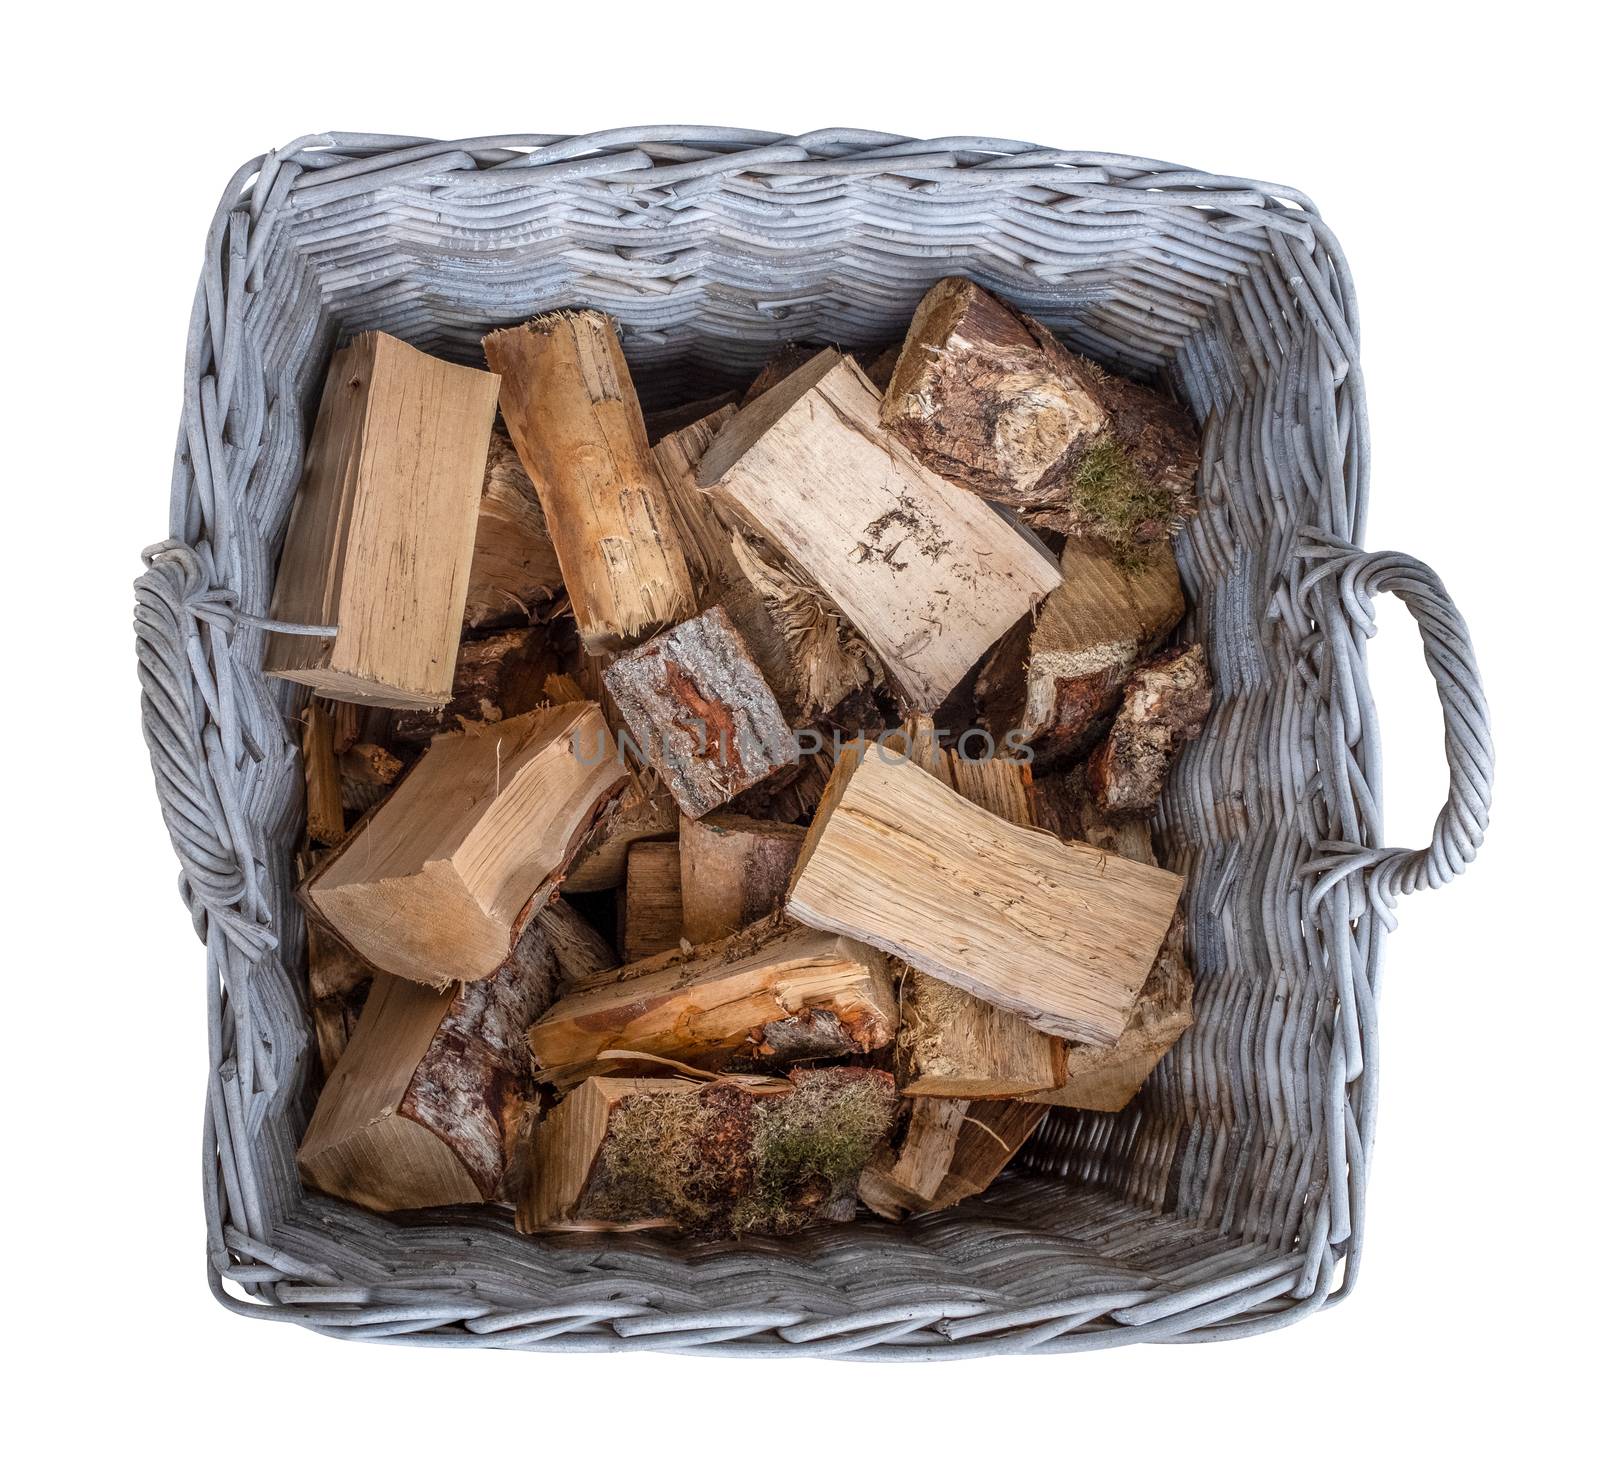 Isolated Old Basket of Cut Firewood In A Rustic Wicker Basket